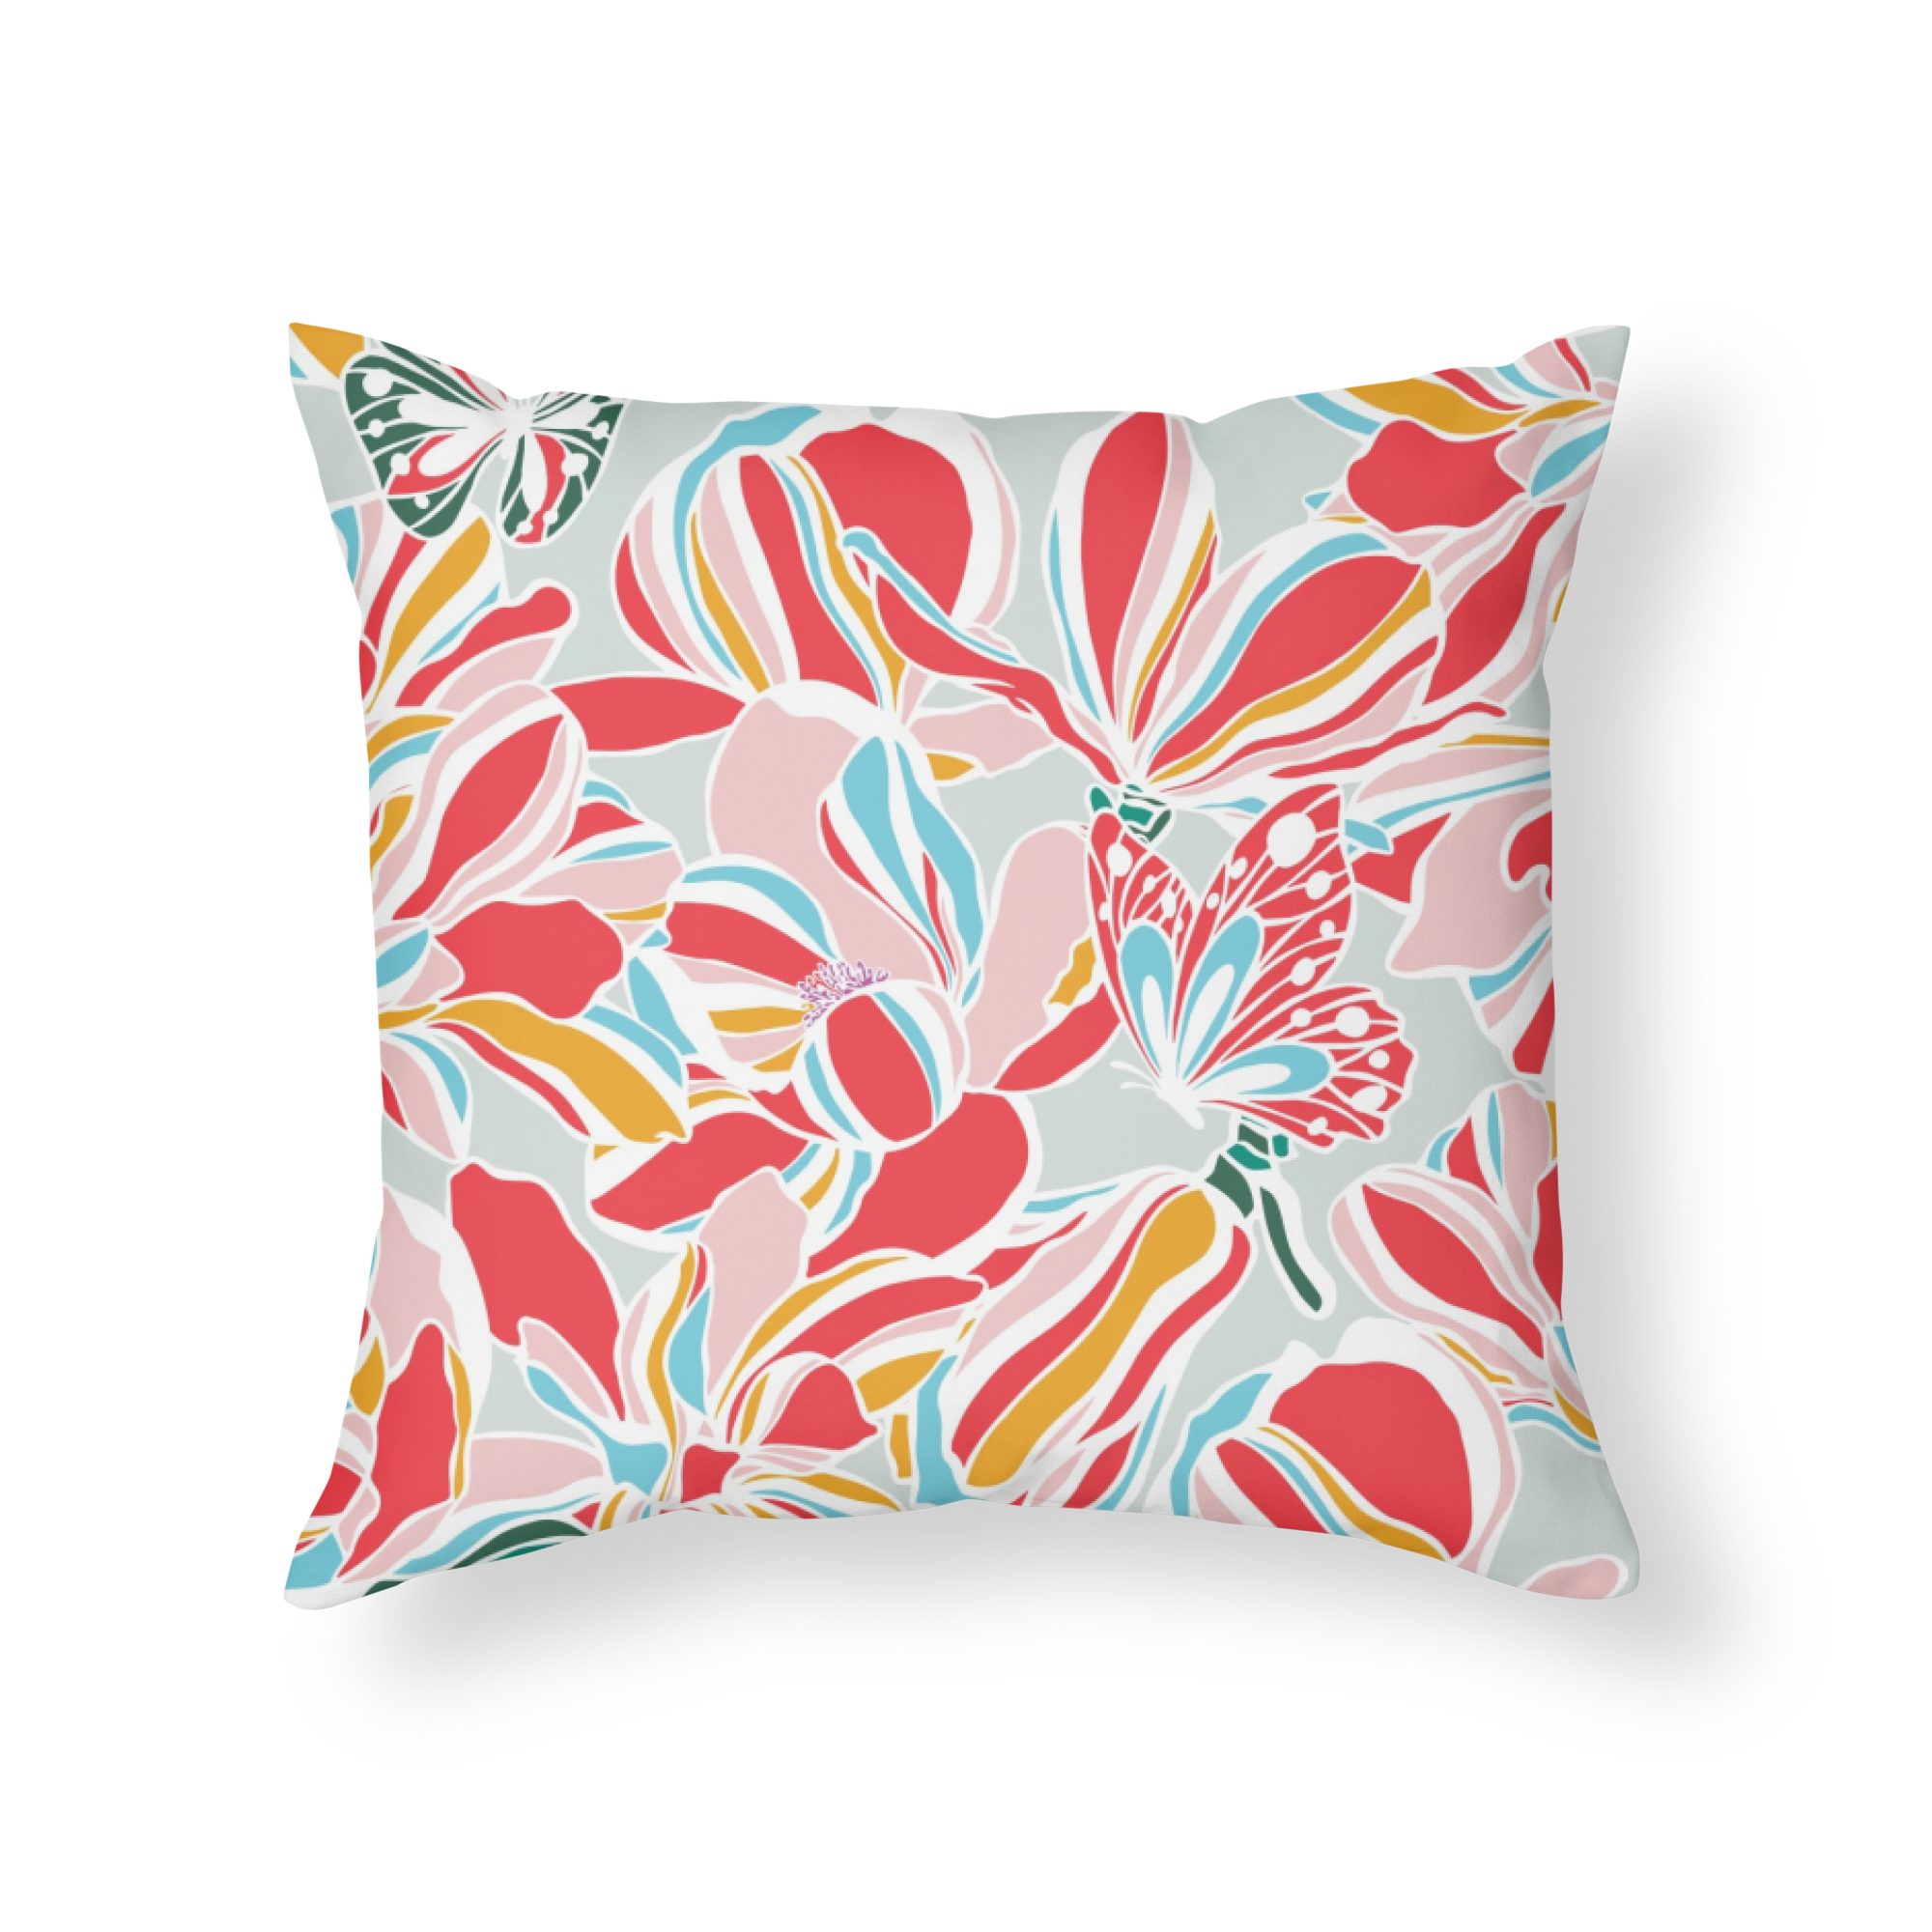 THE MAGNOLIAS AND BUTTERFLIES, home throw pillow